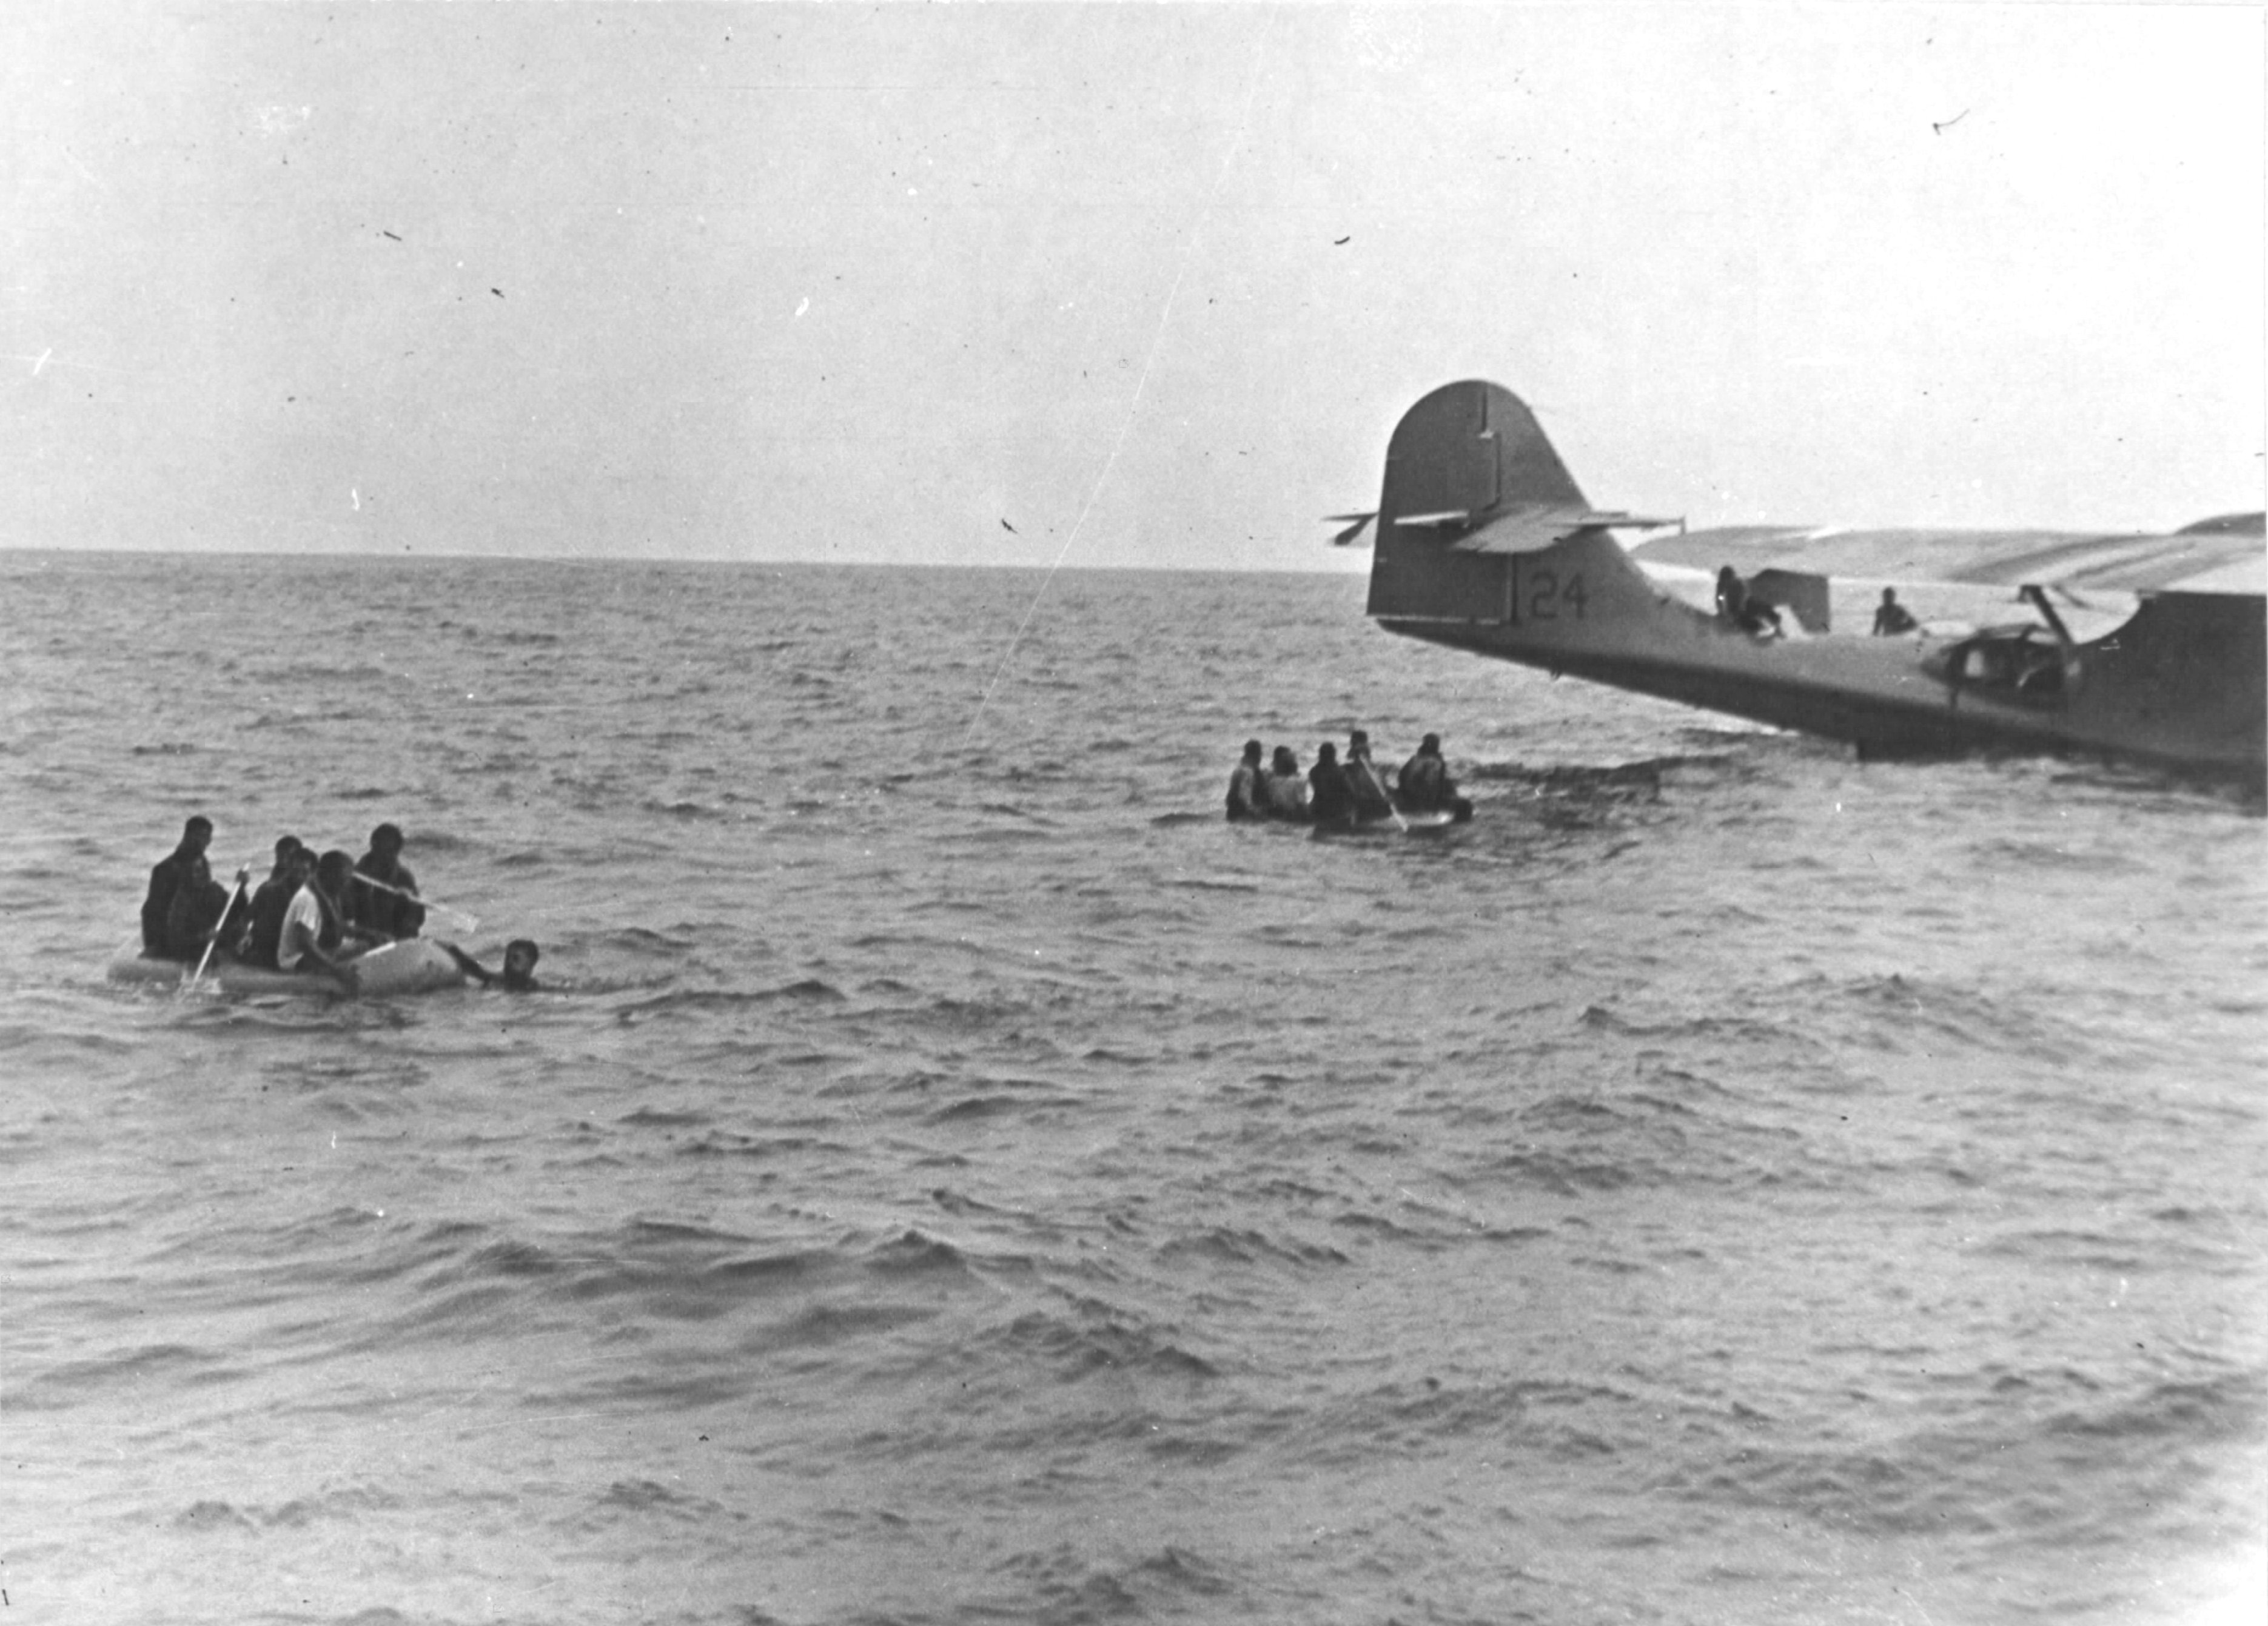 The rescue of Brigadier General Nathan Twining and his party of 14 who had been adrift in the Coral Sea for 5 days after their B-17 aircraft was forced to ditch, 1 Feb 1943. Note PBY Catalina of Patrol Squadron VP-91